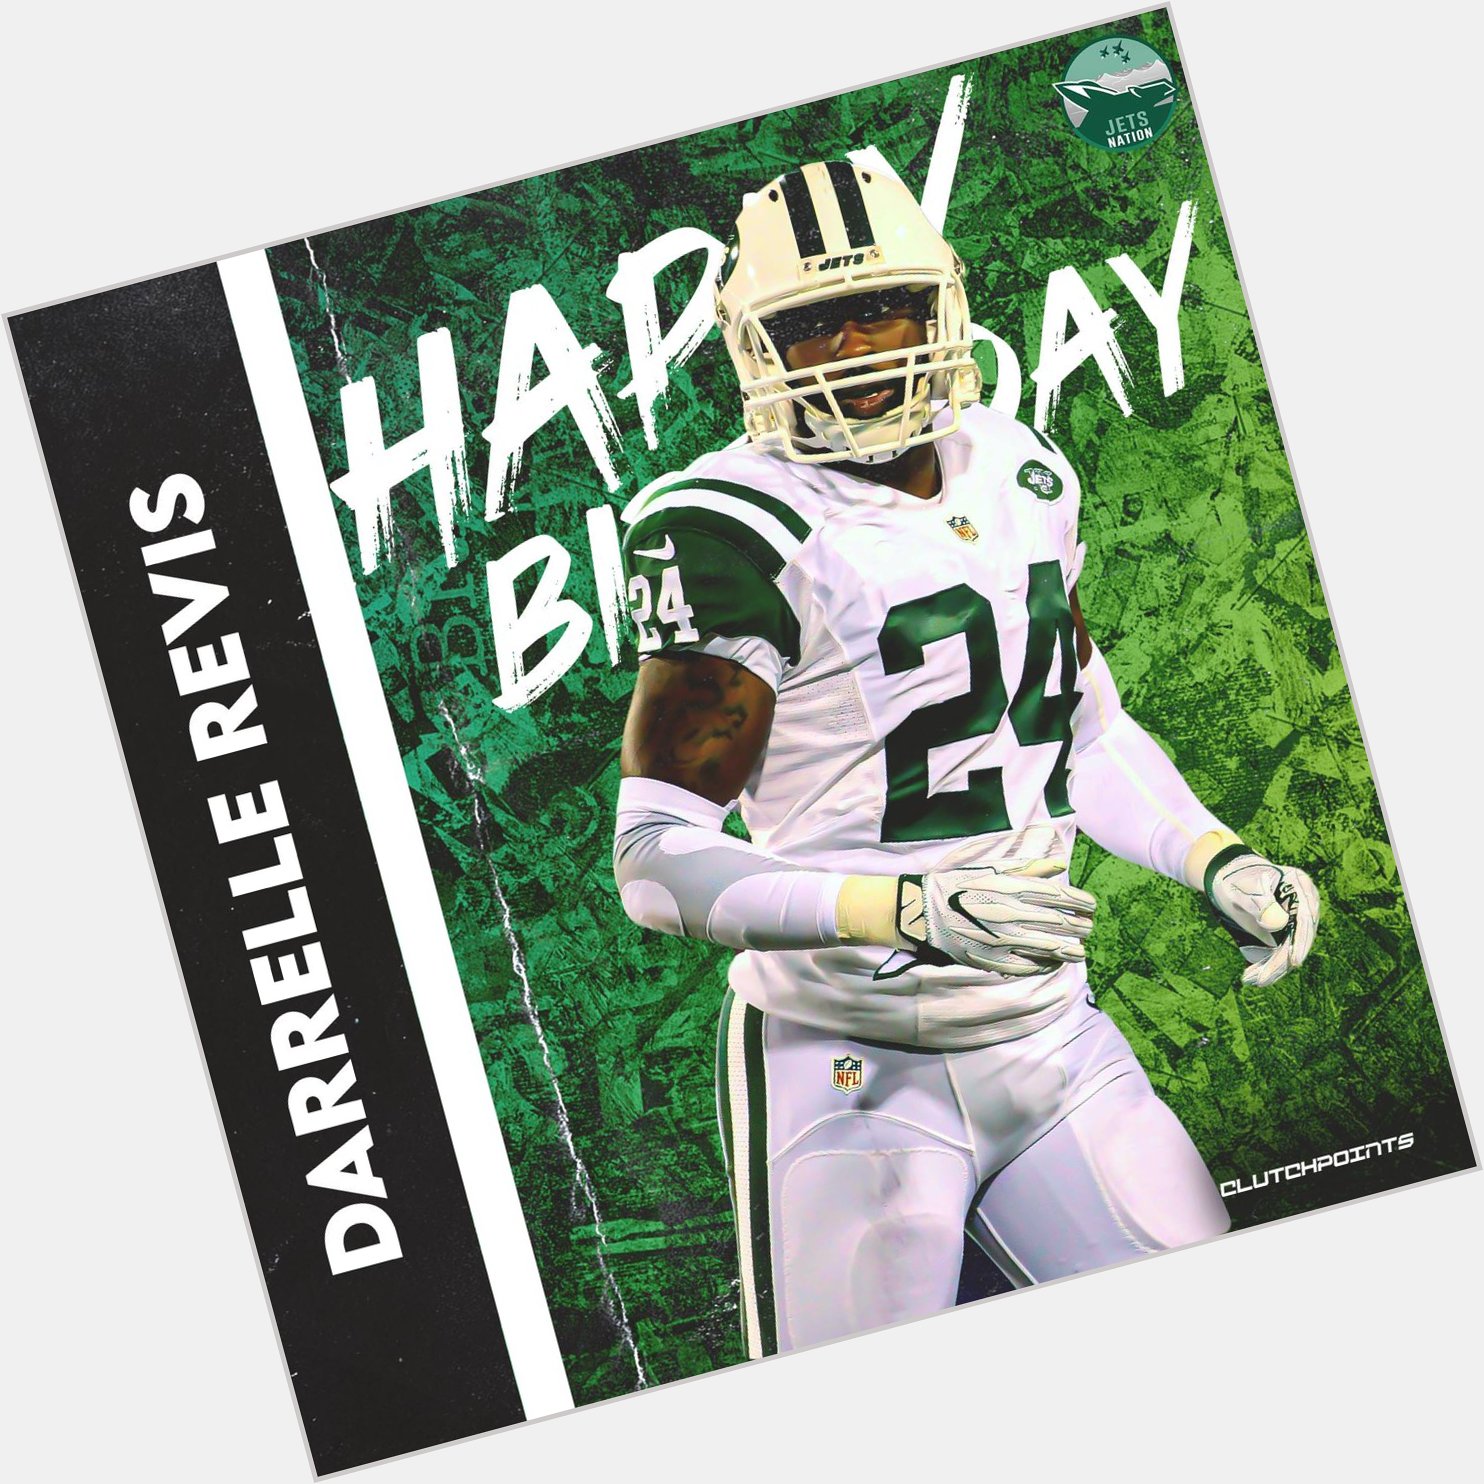 Join Jets Nation in greeting Darrelle Revis a happy 36th birthday!  